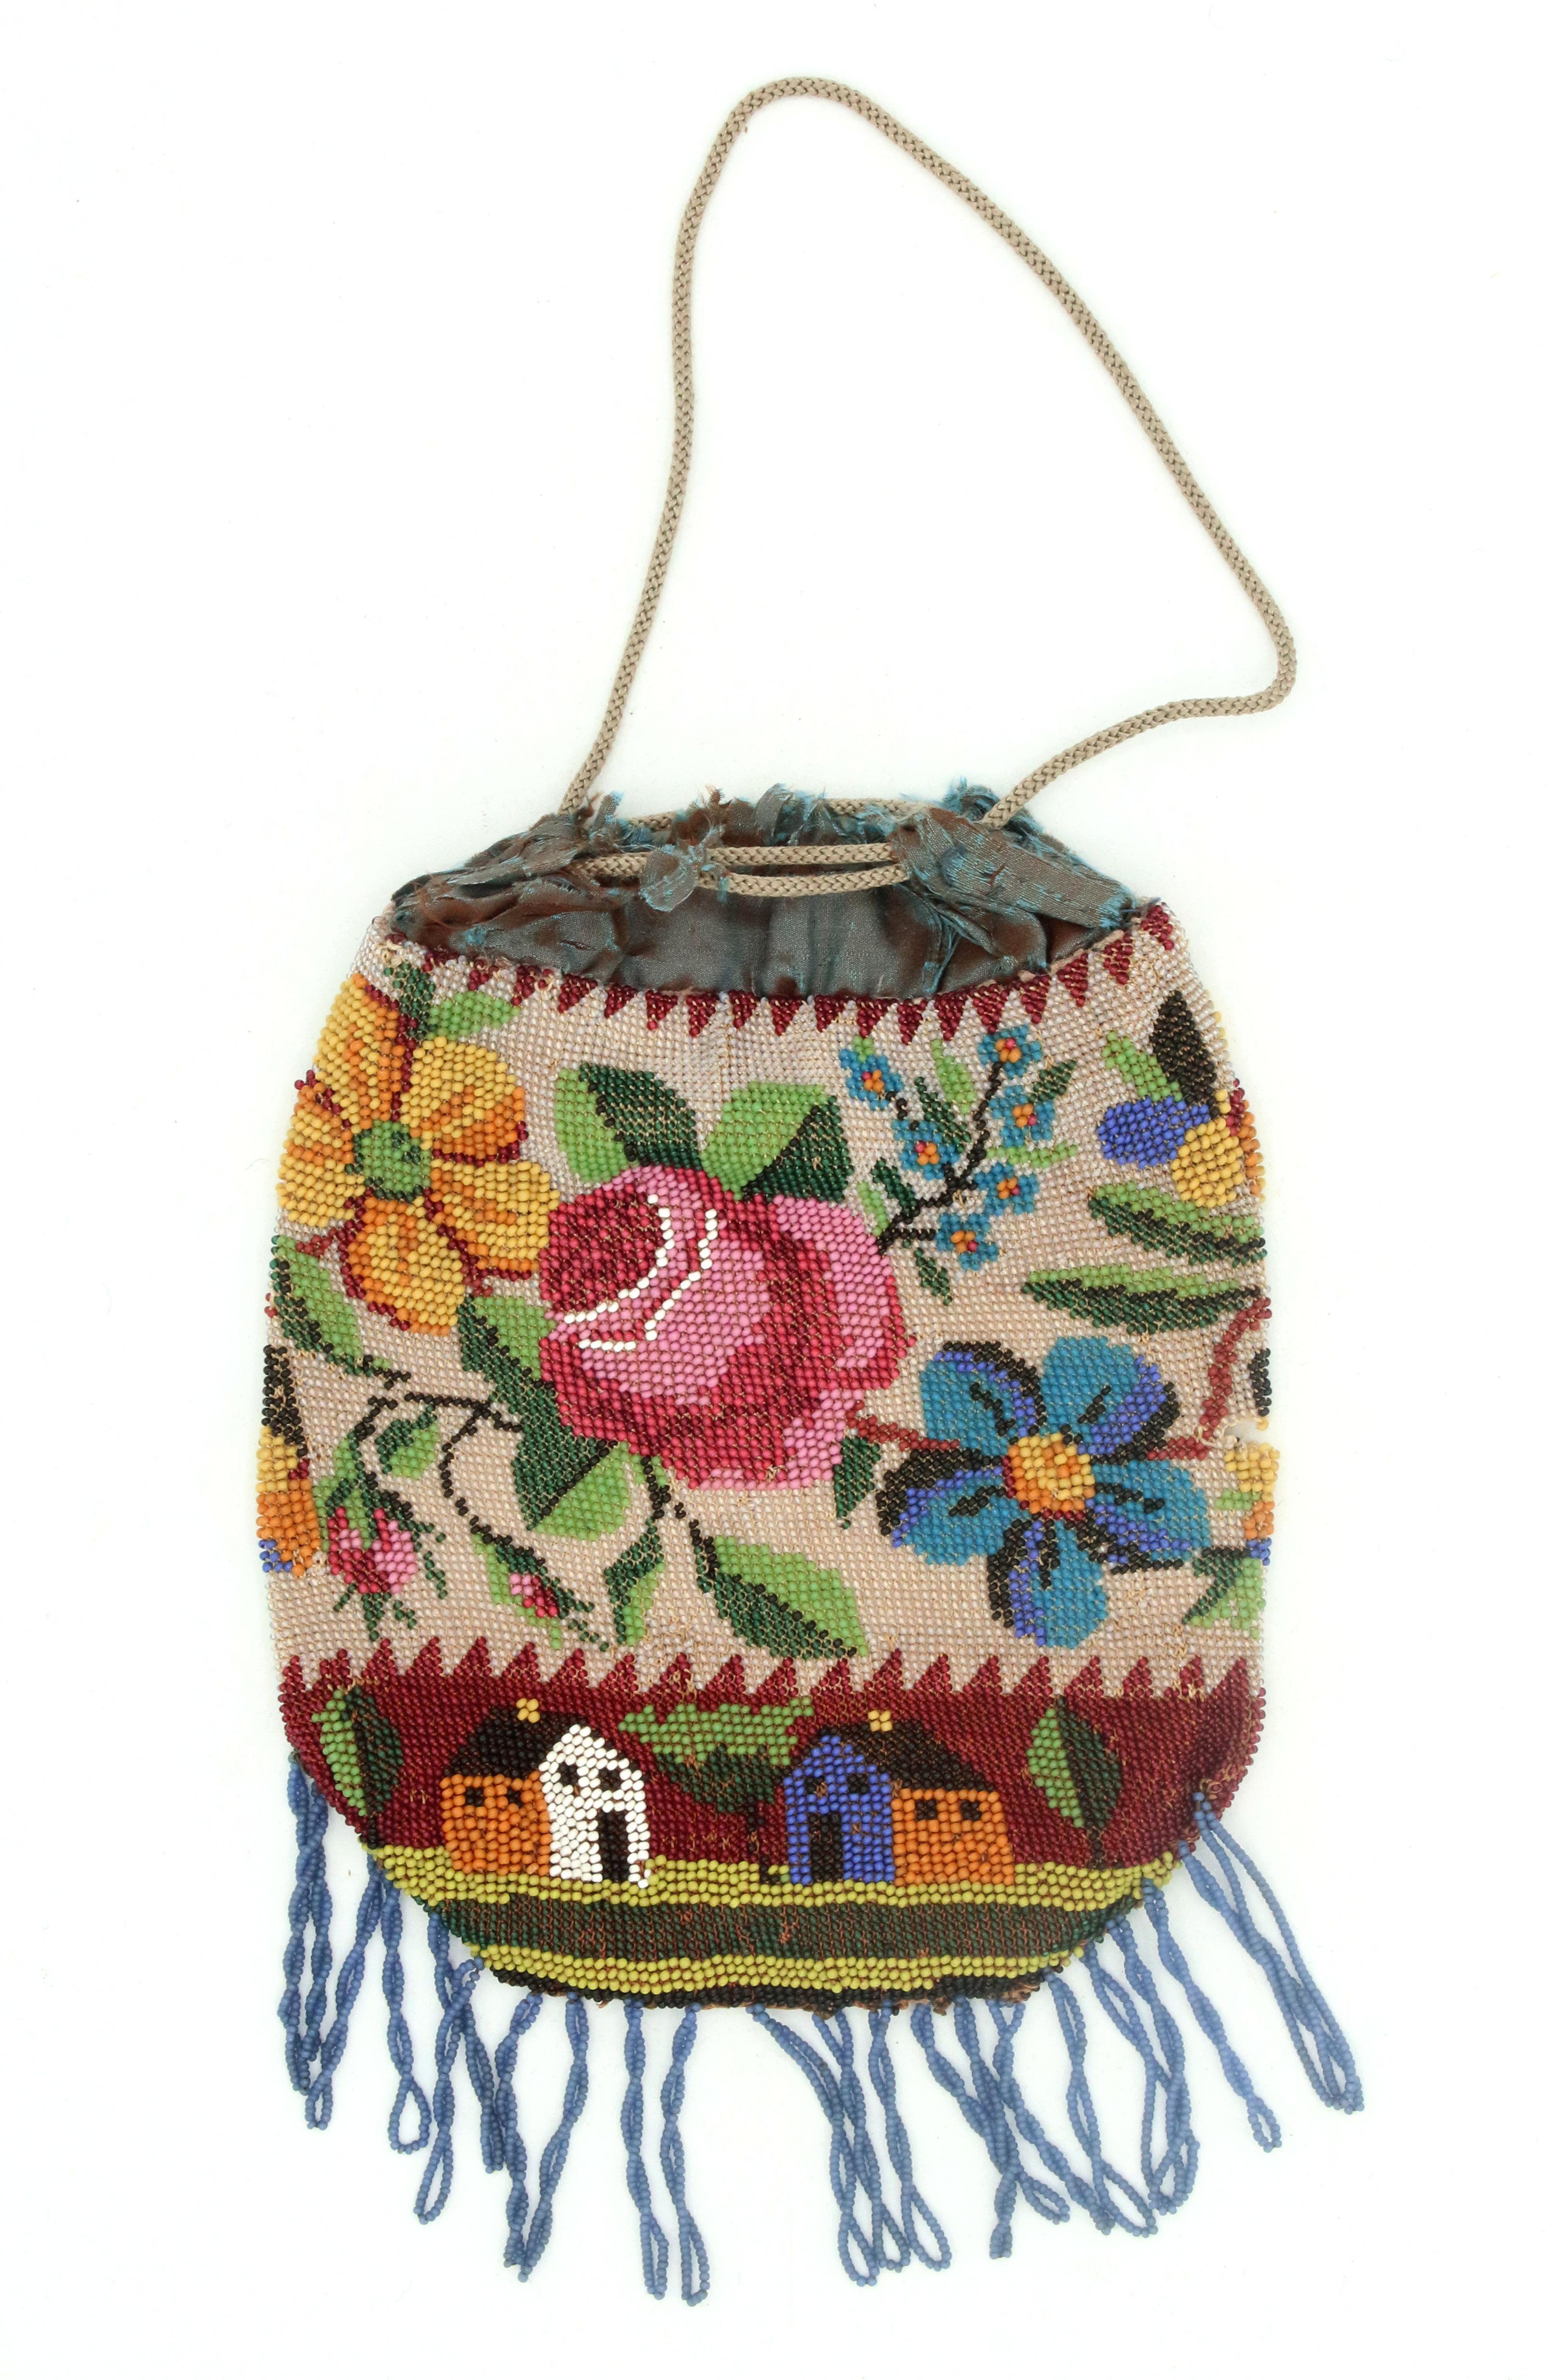 circa 1890s micro-beaded draw-string evening bag. Scenic design with Shaker Style houses appears in various bag designs & color variations. Silk lining is fragile with some tatters. Small tear in beading on mid-side.

8